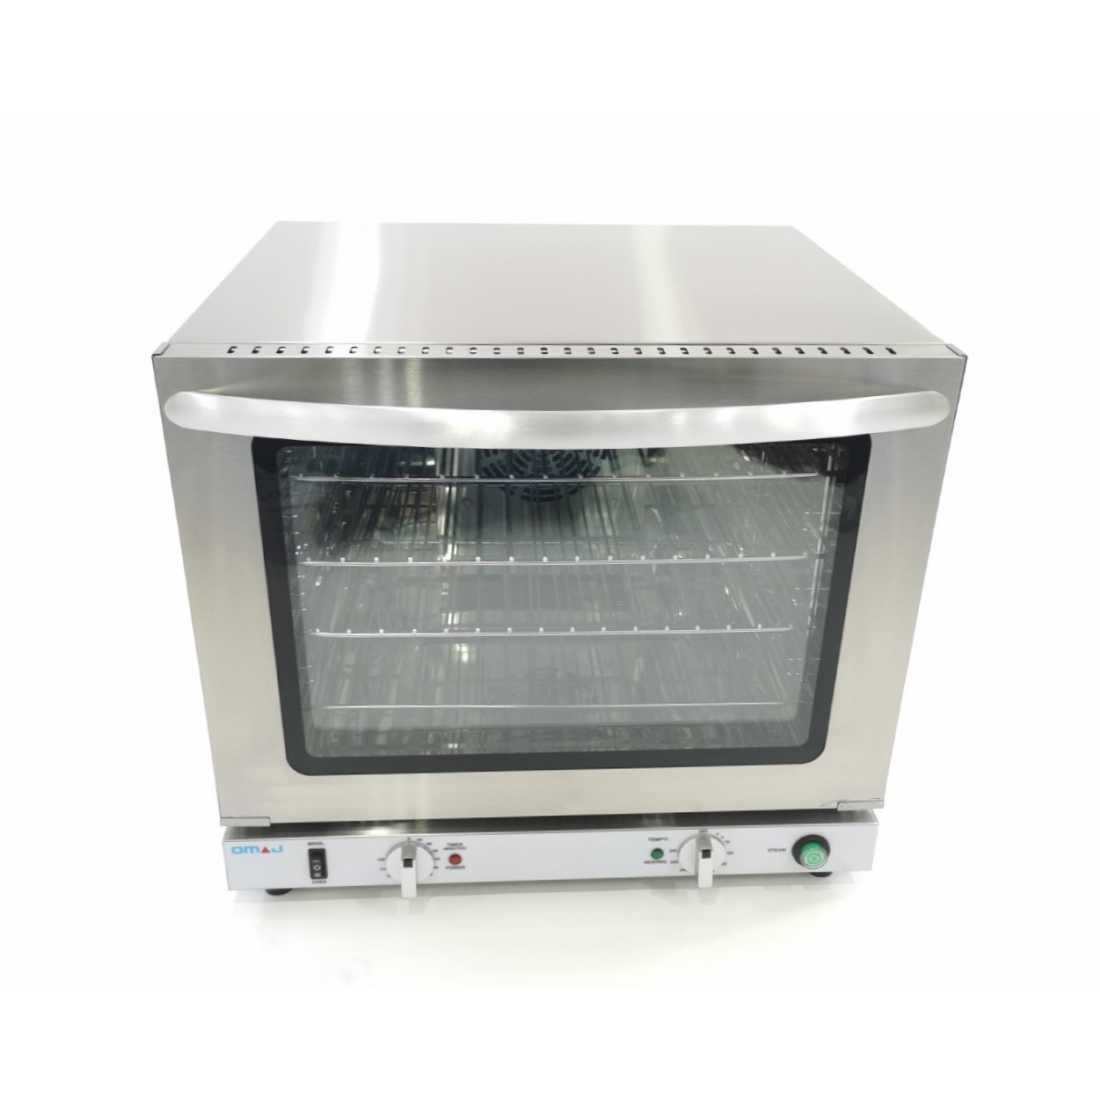 OMAJ ,FD-100, Electric Convection Oven with Steam 100 Lt|mkayn|مكاين